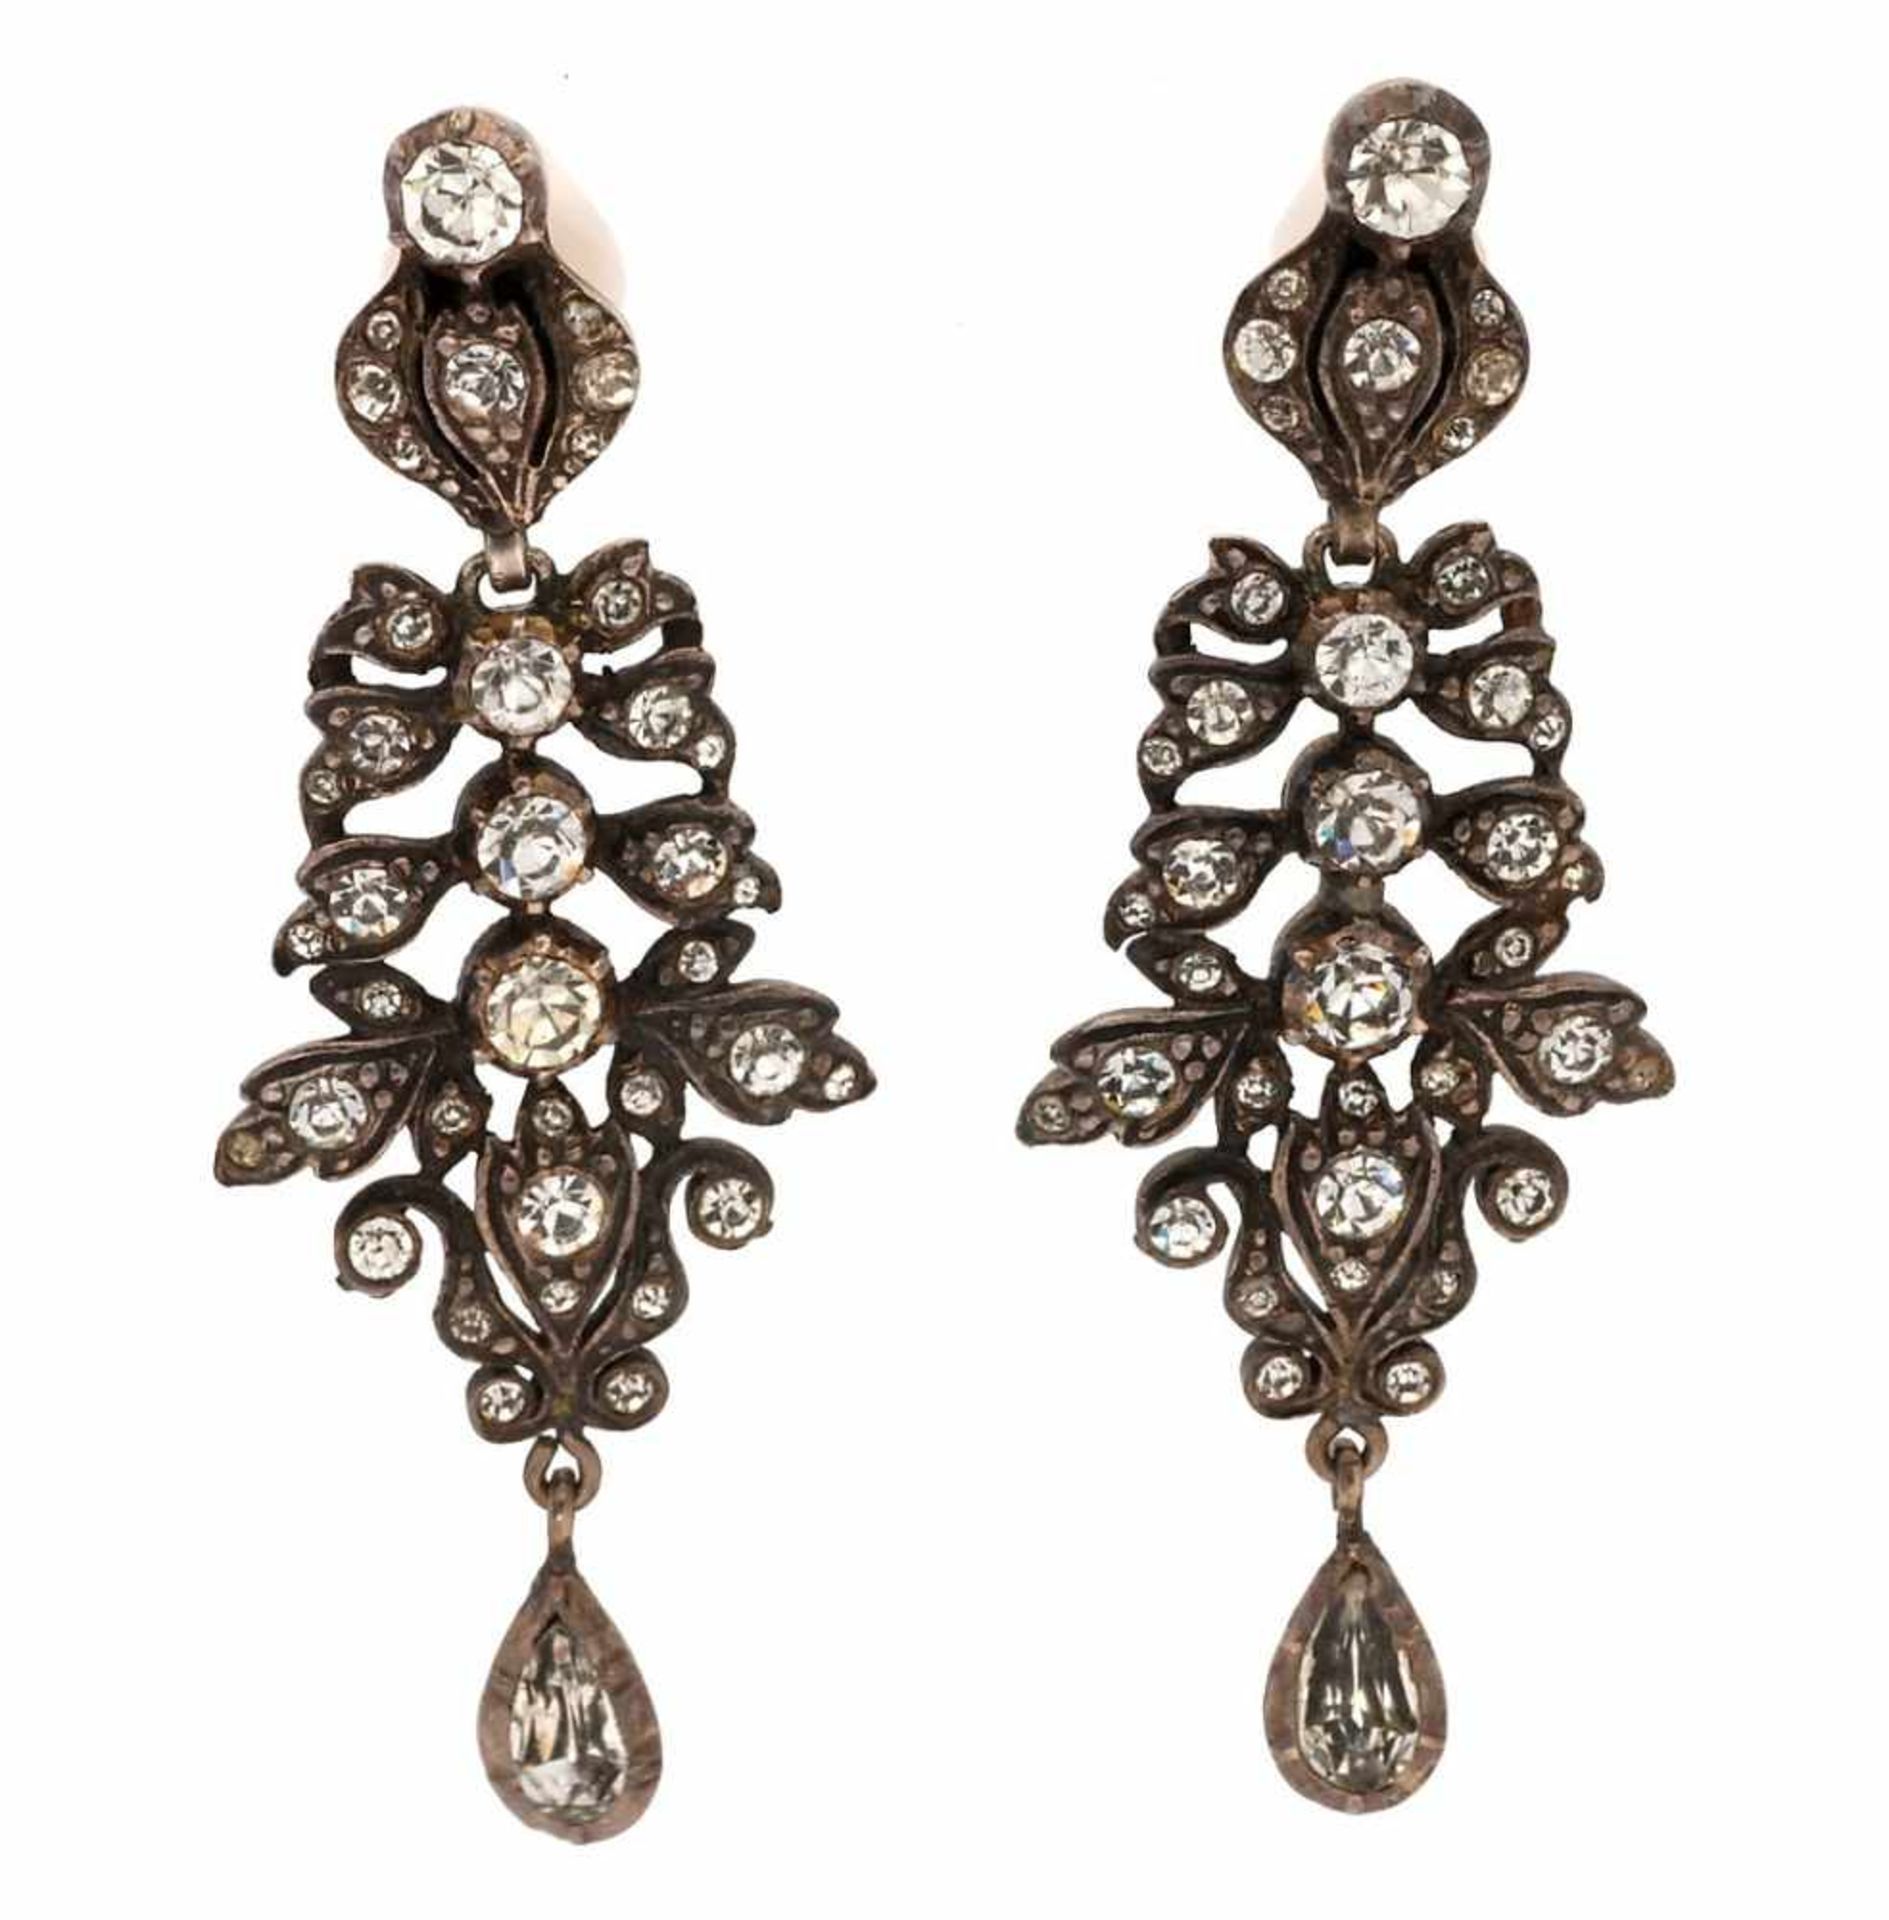 Earrings in silver and rhinestones, 19th Century.Silver and rhinestones. Gold clasp. 6.5 cm. 25.6